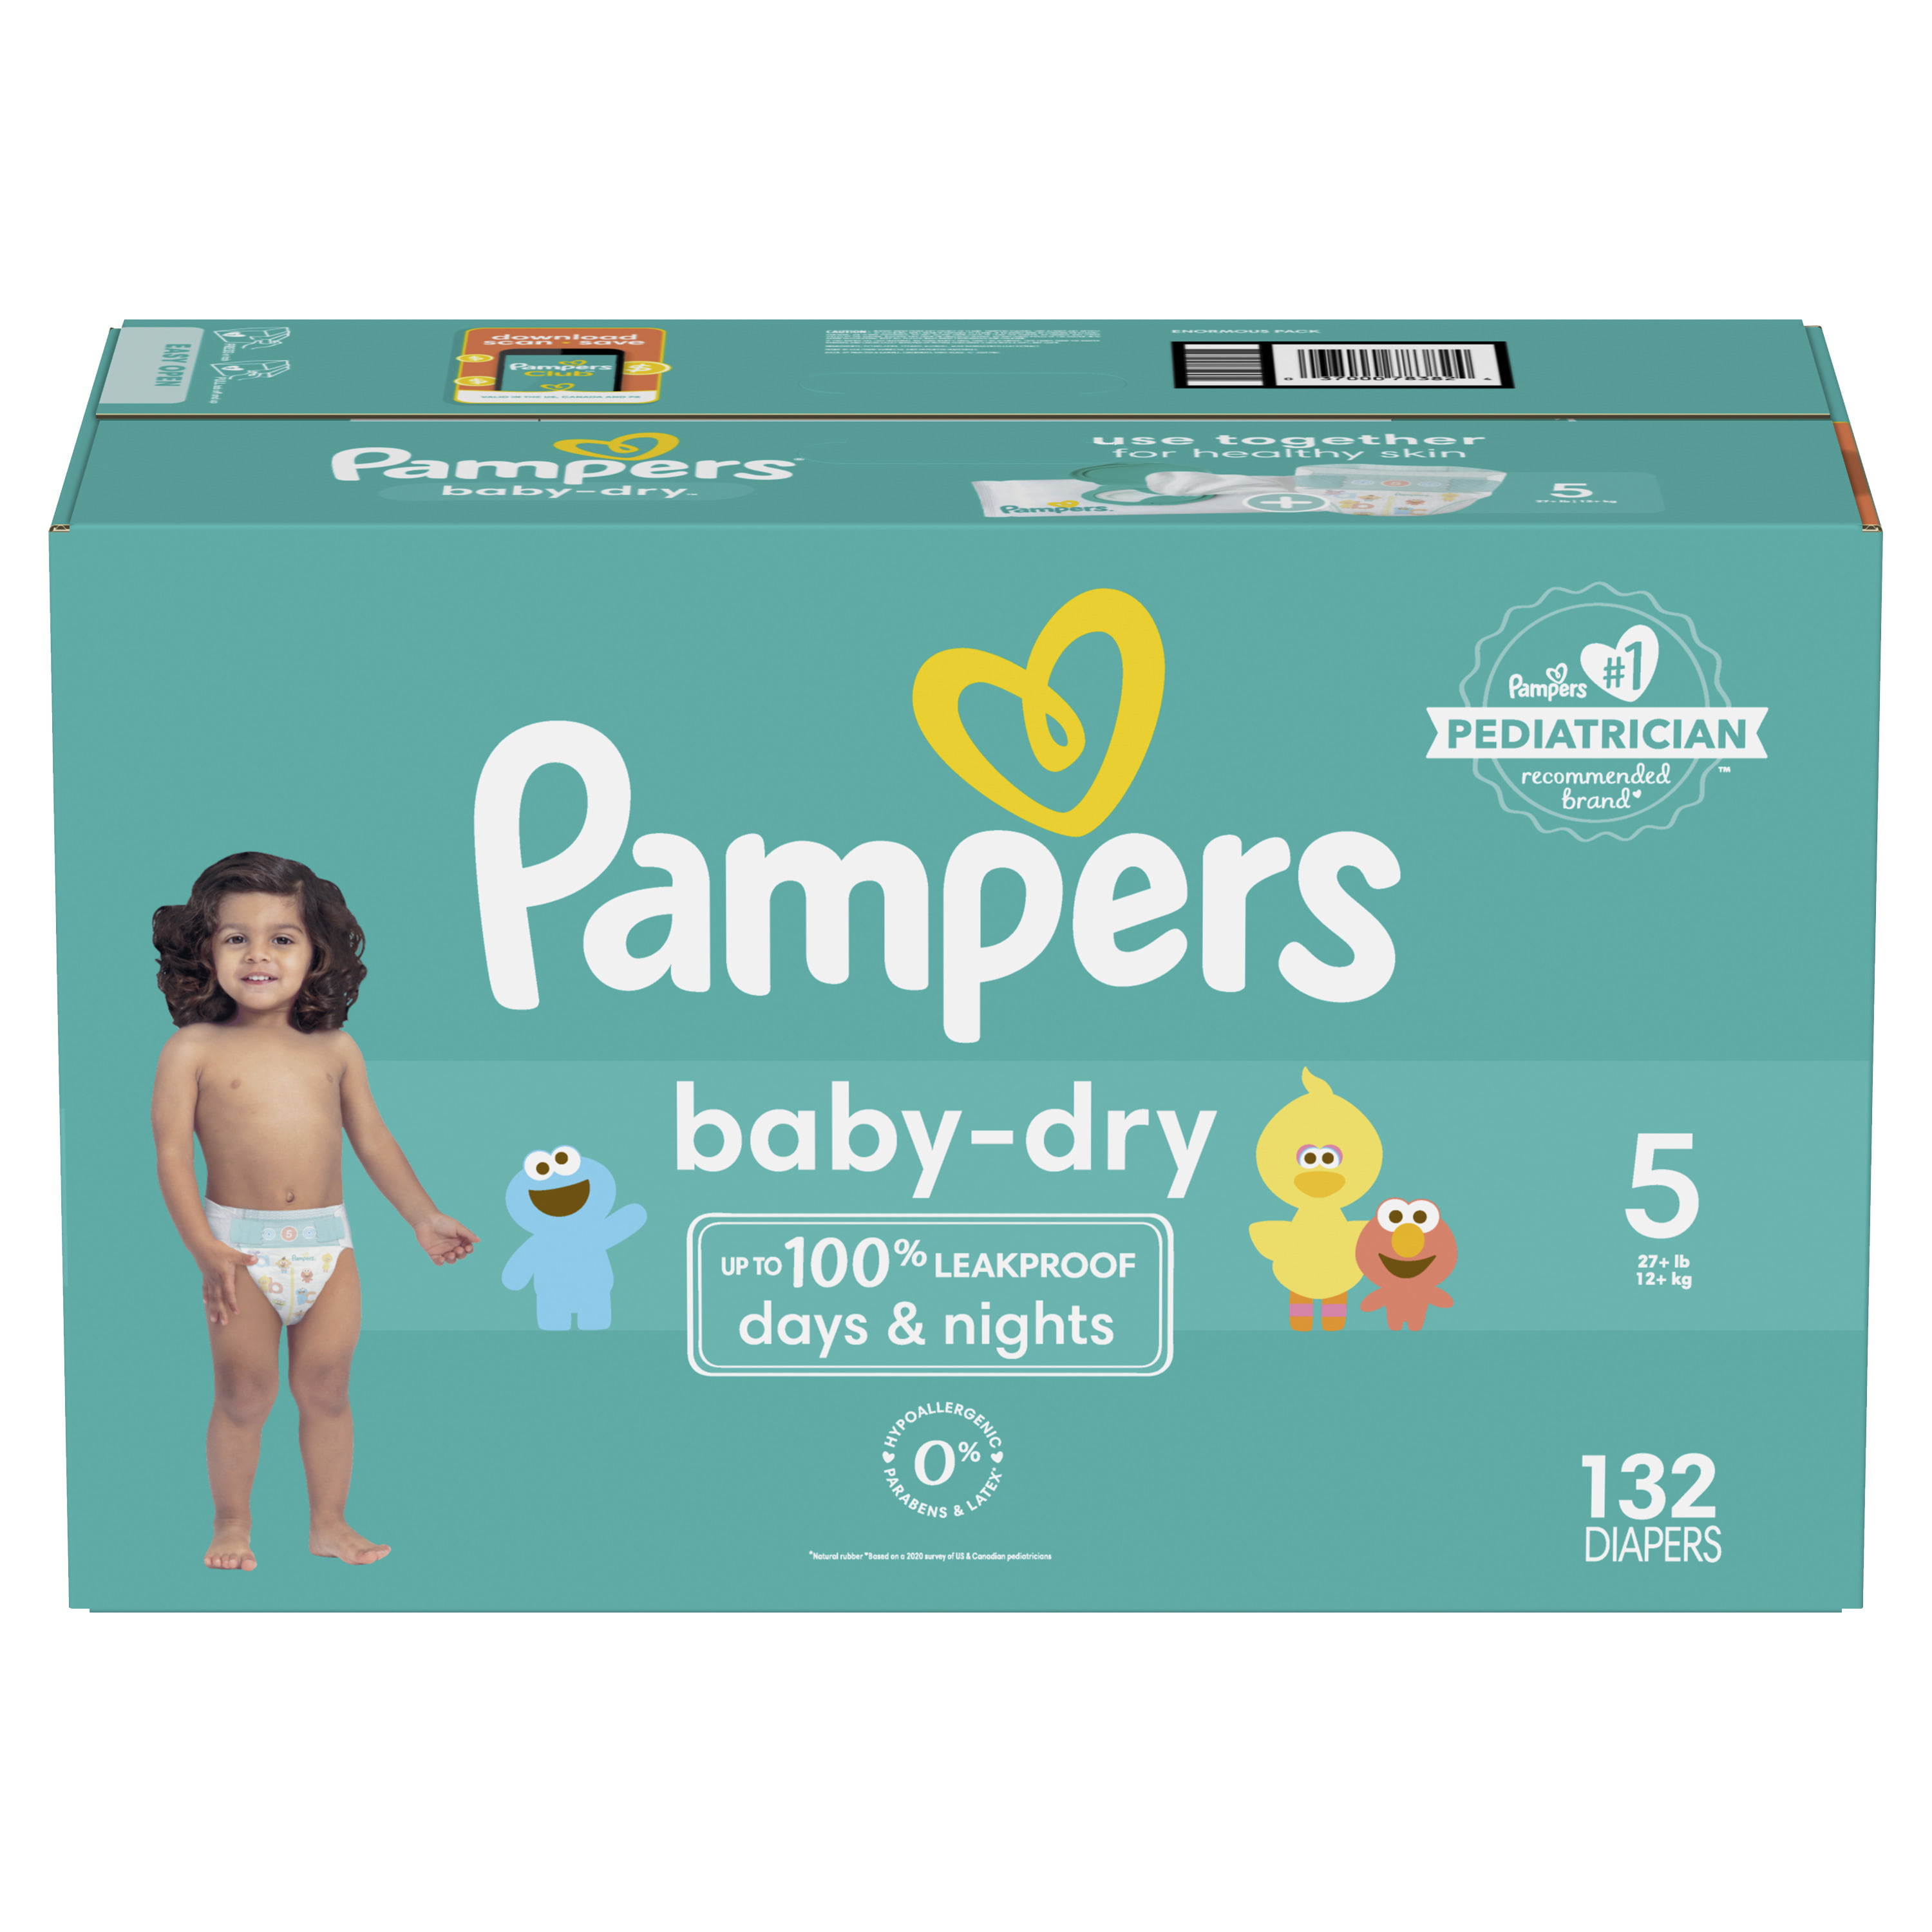 Raise yourself Snowstorm Stun Pampers Baby Dry Extra Protection Diapers, Size 5, 132 Count - Walmart.com